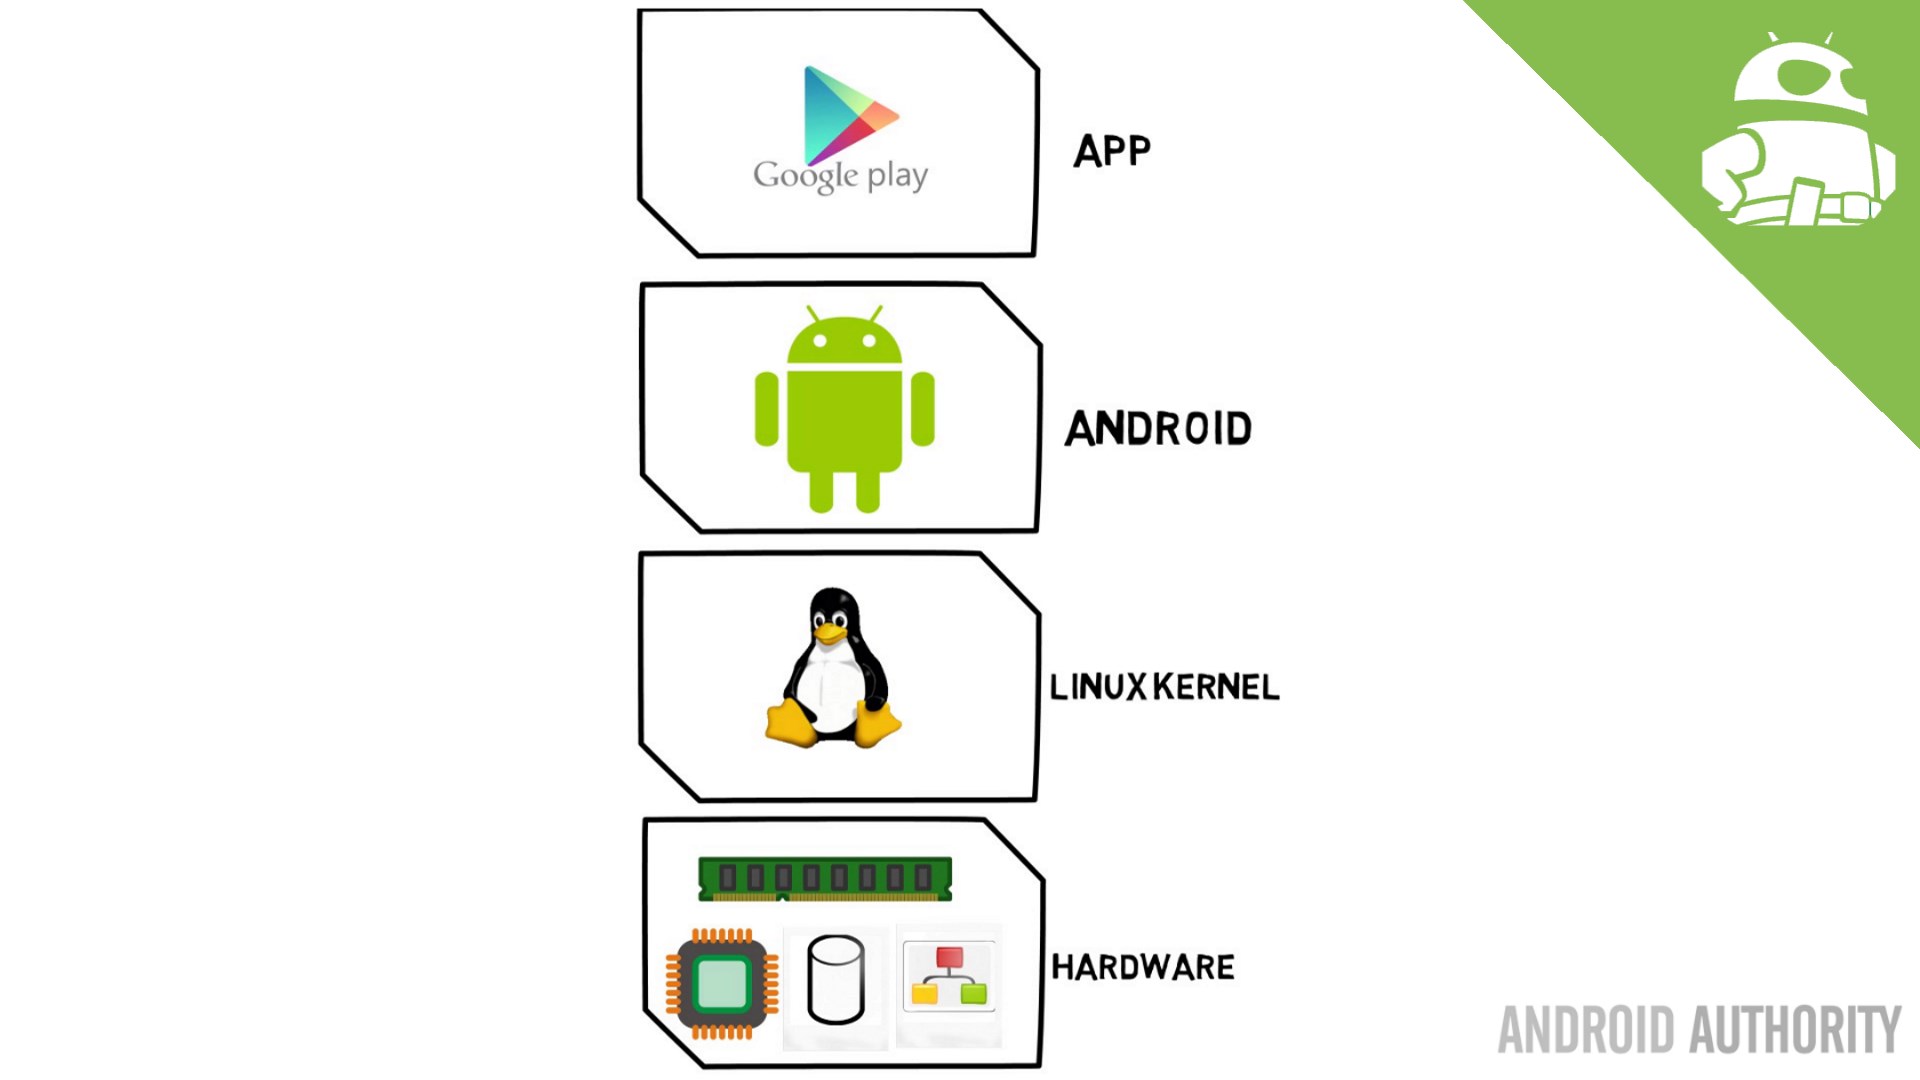 Latest AndEX Update Brings Linux Kernel 4.4.27 LTS to Android 7.0